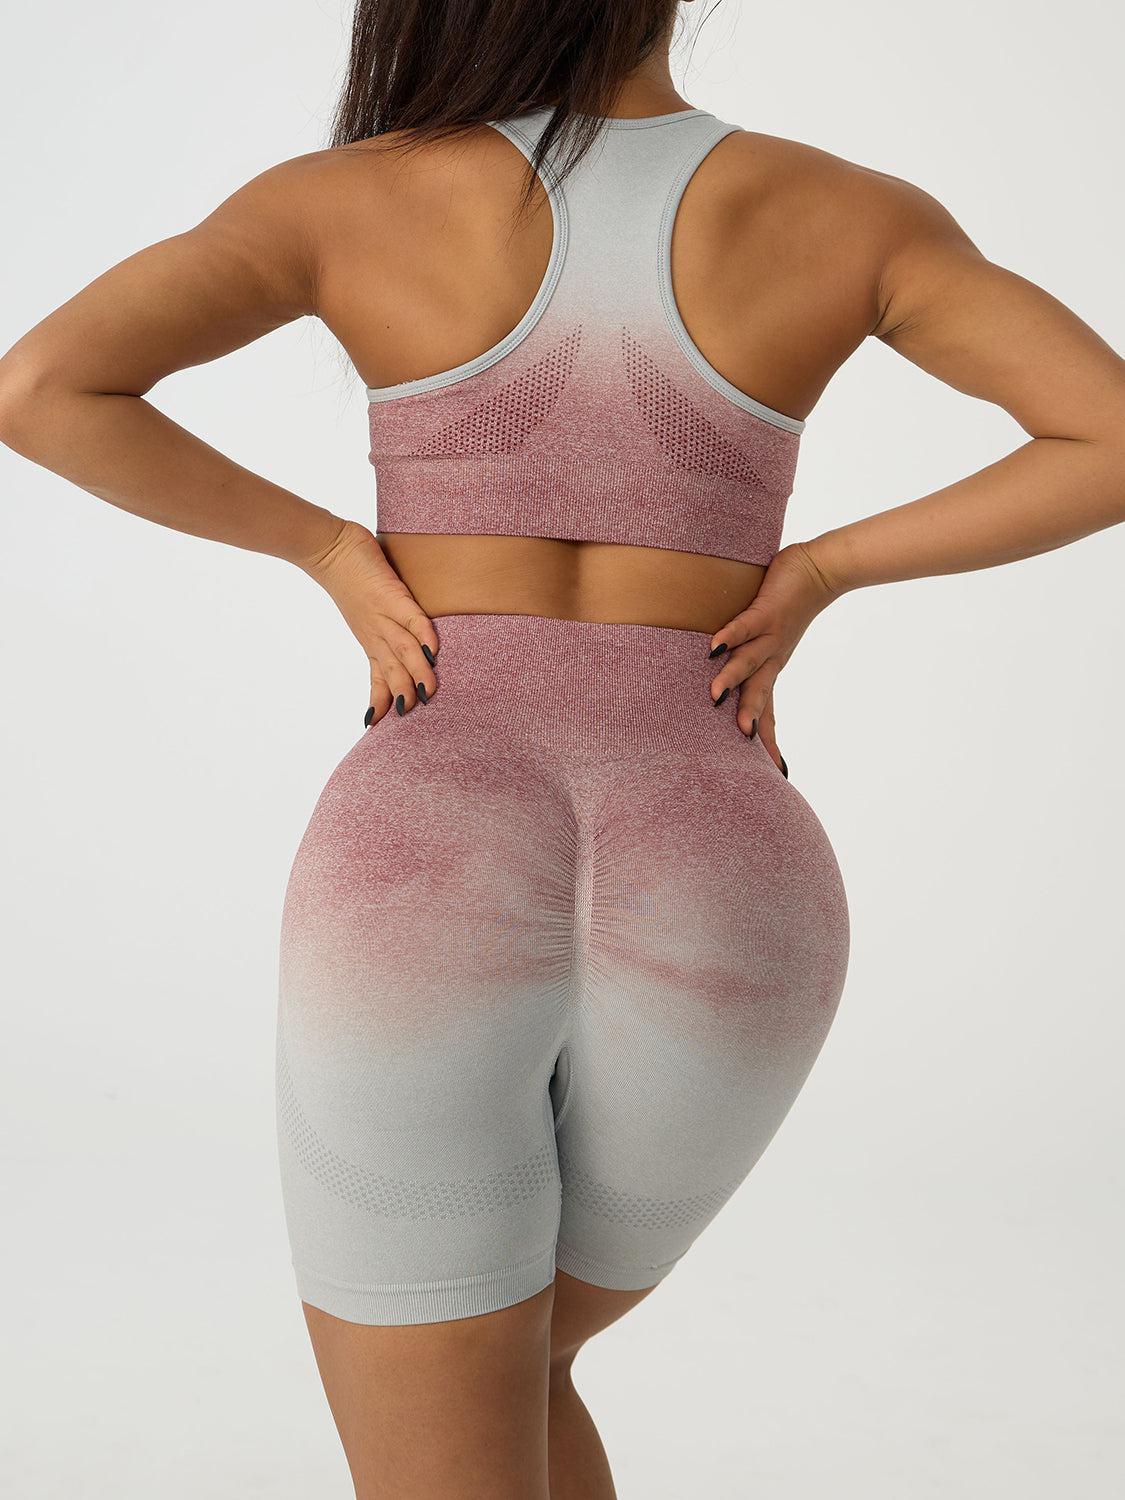 the back of a woman in a pink and white sports bra top